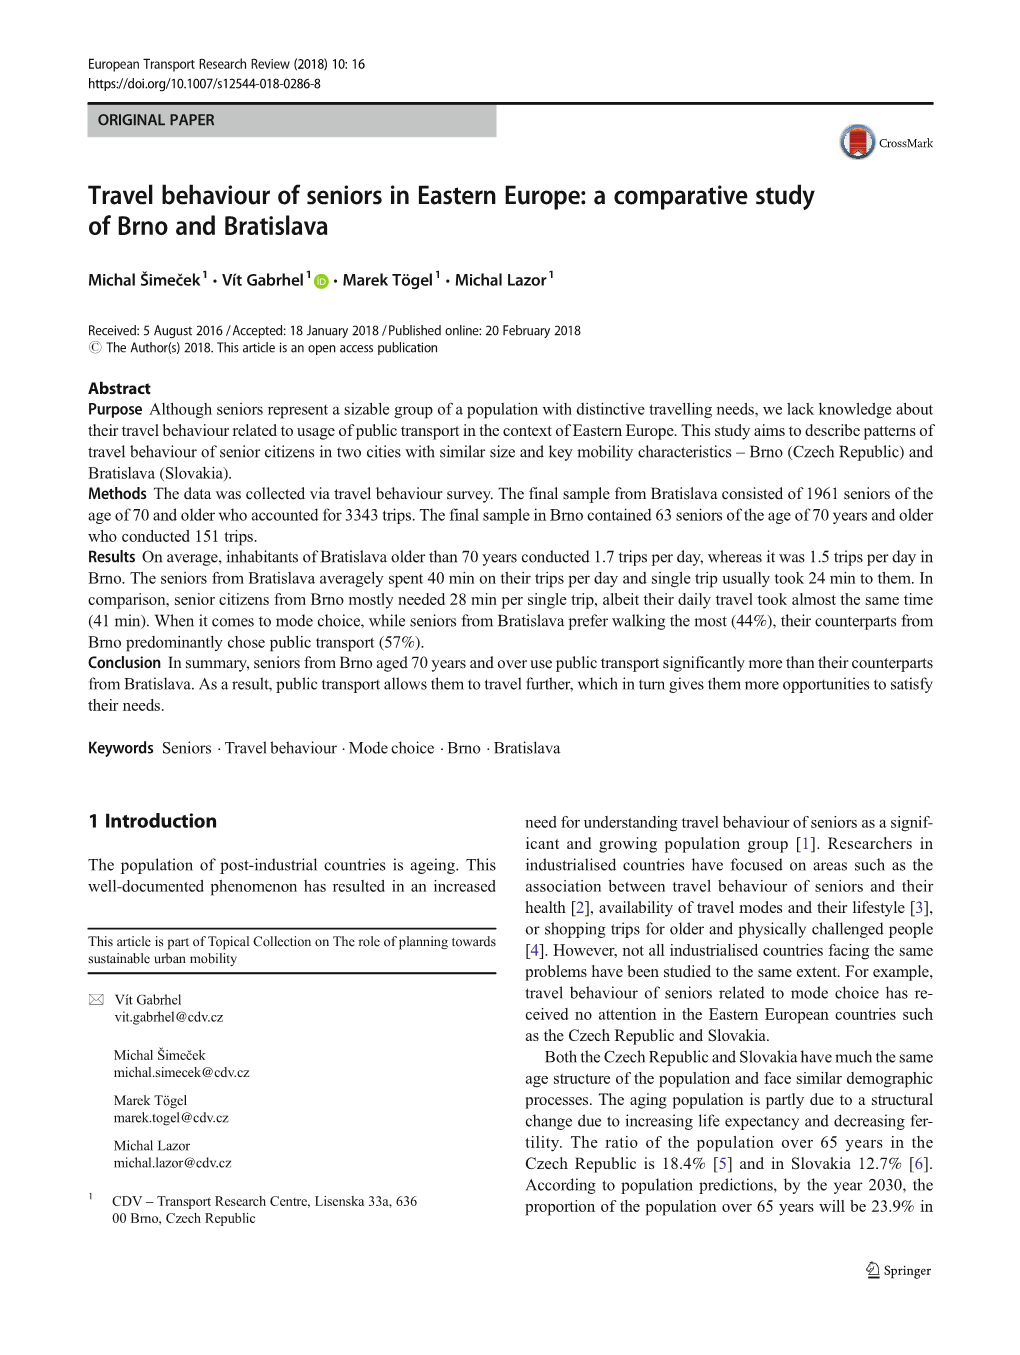 Travel Behaviour of Seniors in Eastern Europe: a Comparative Study of Brno and Bratislava